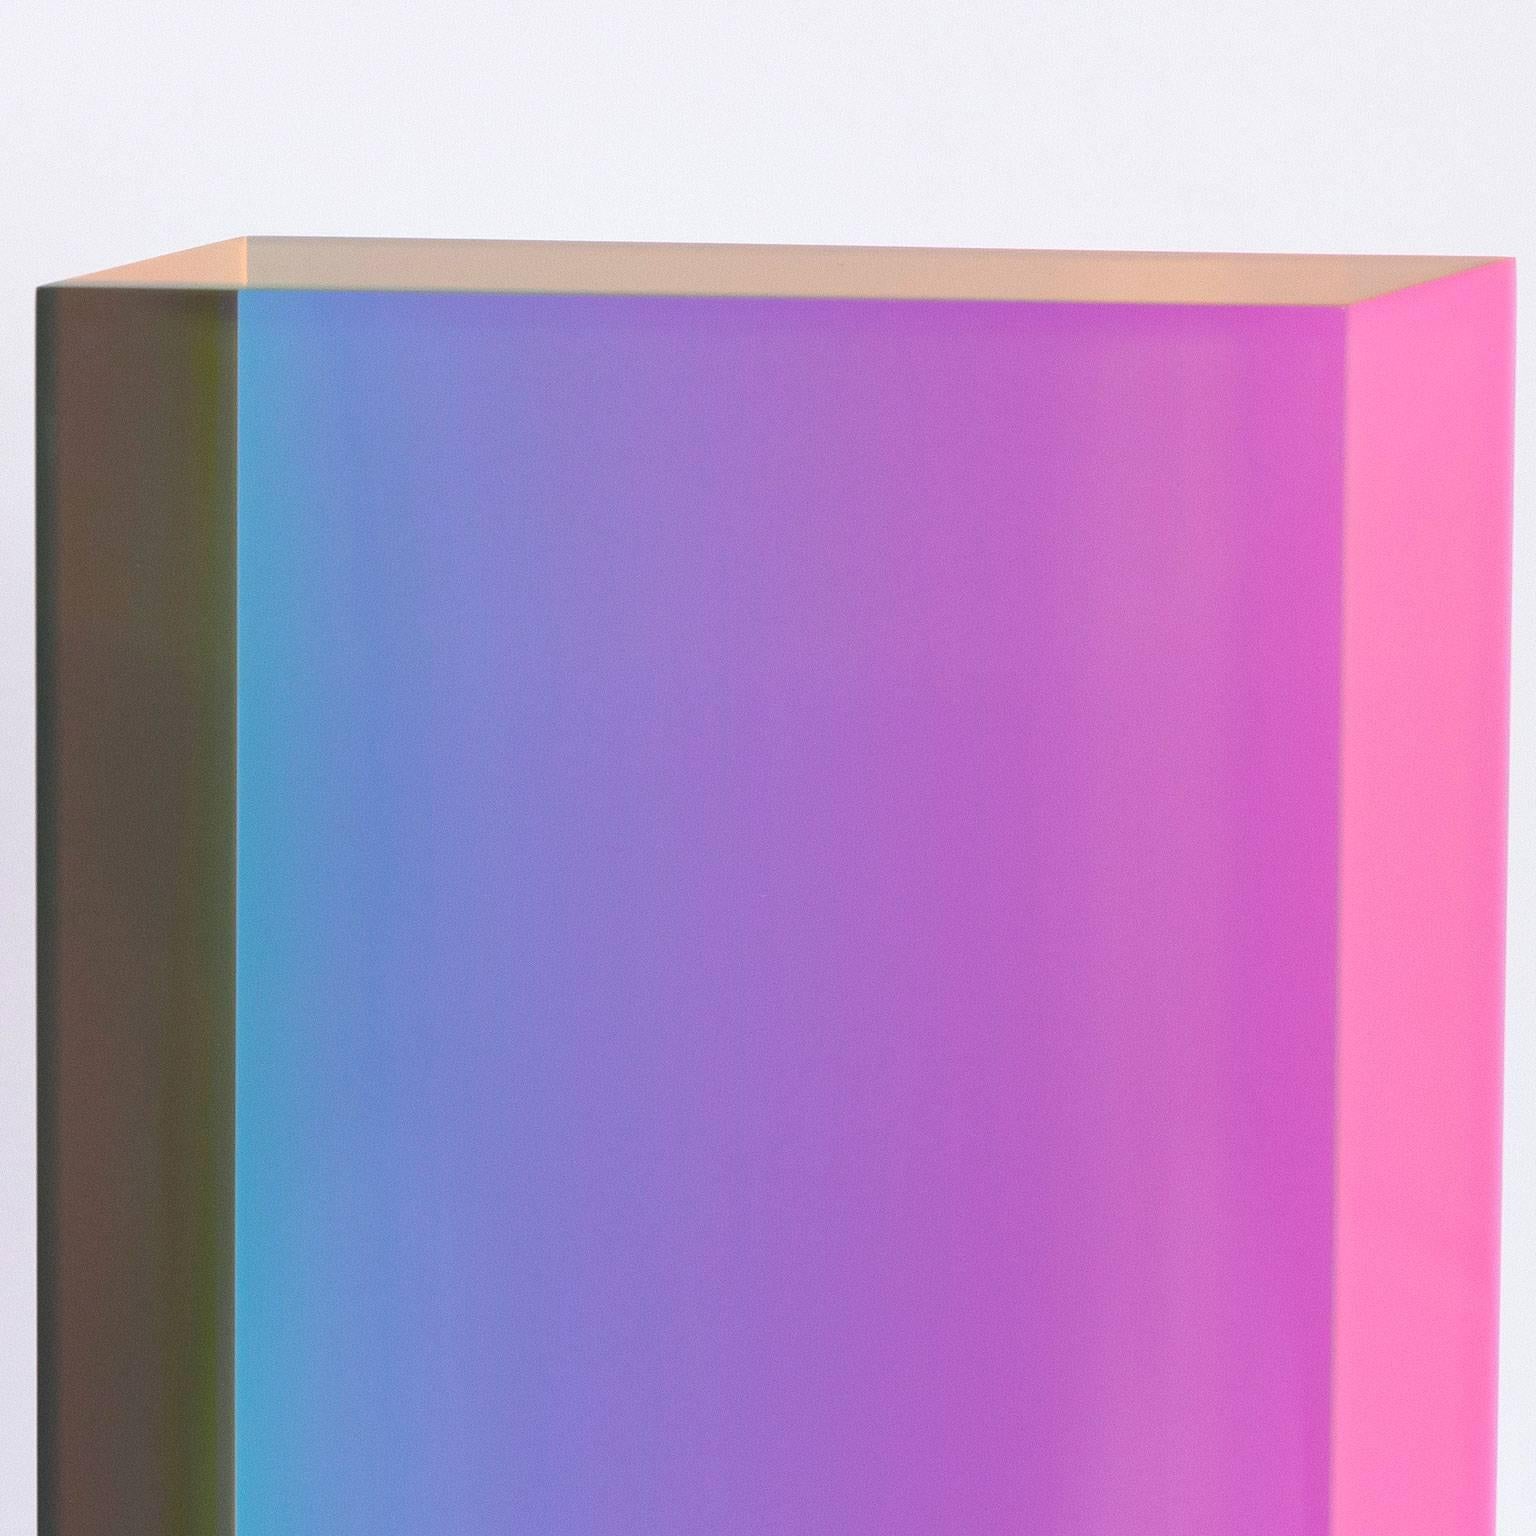 The ombre, translucent rainbow is one of Vasa Mihich's signature creations.

This work 